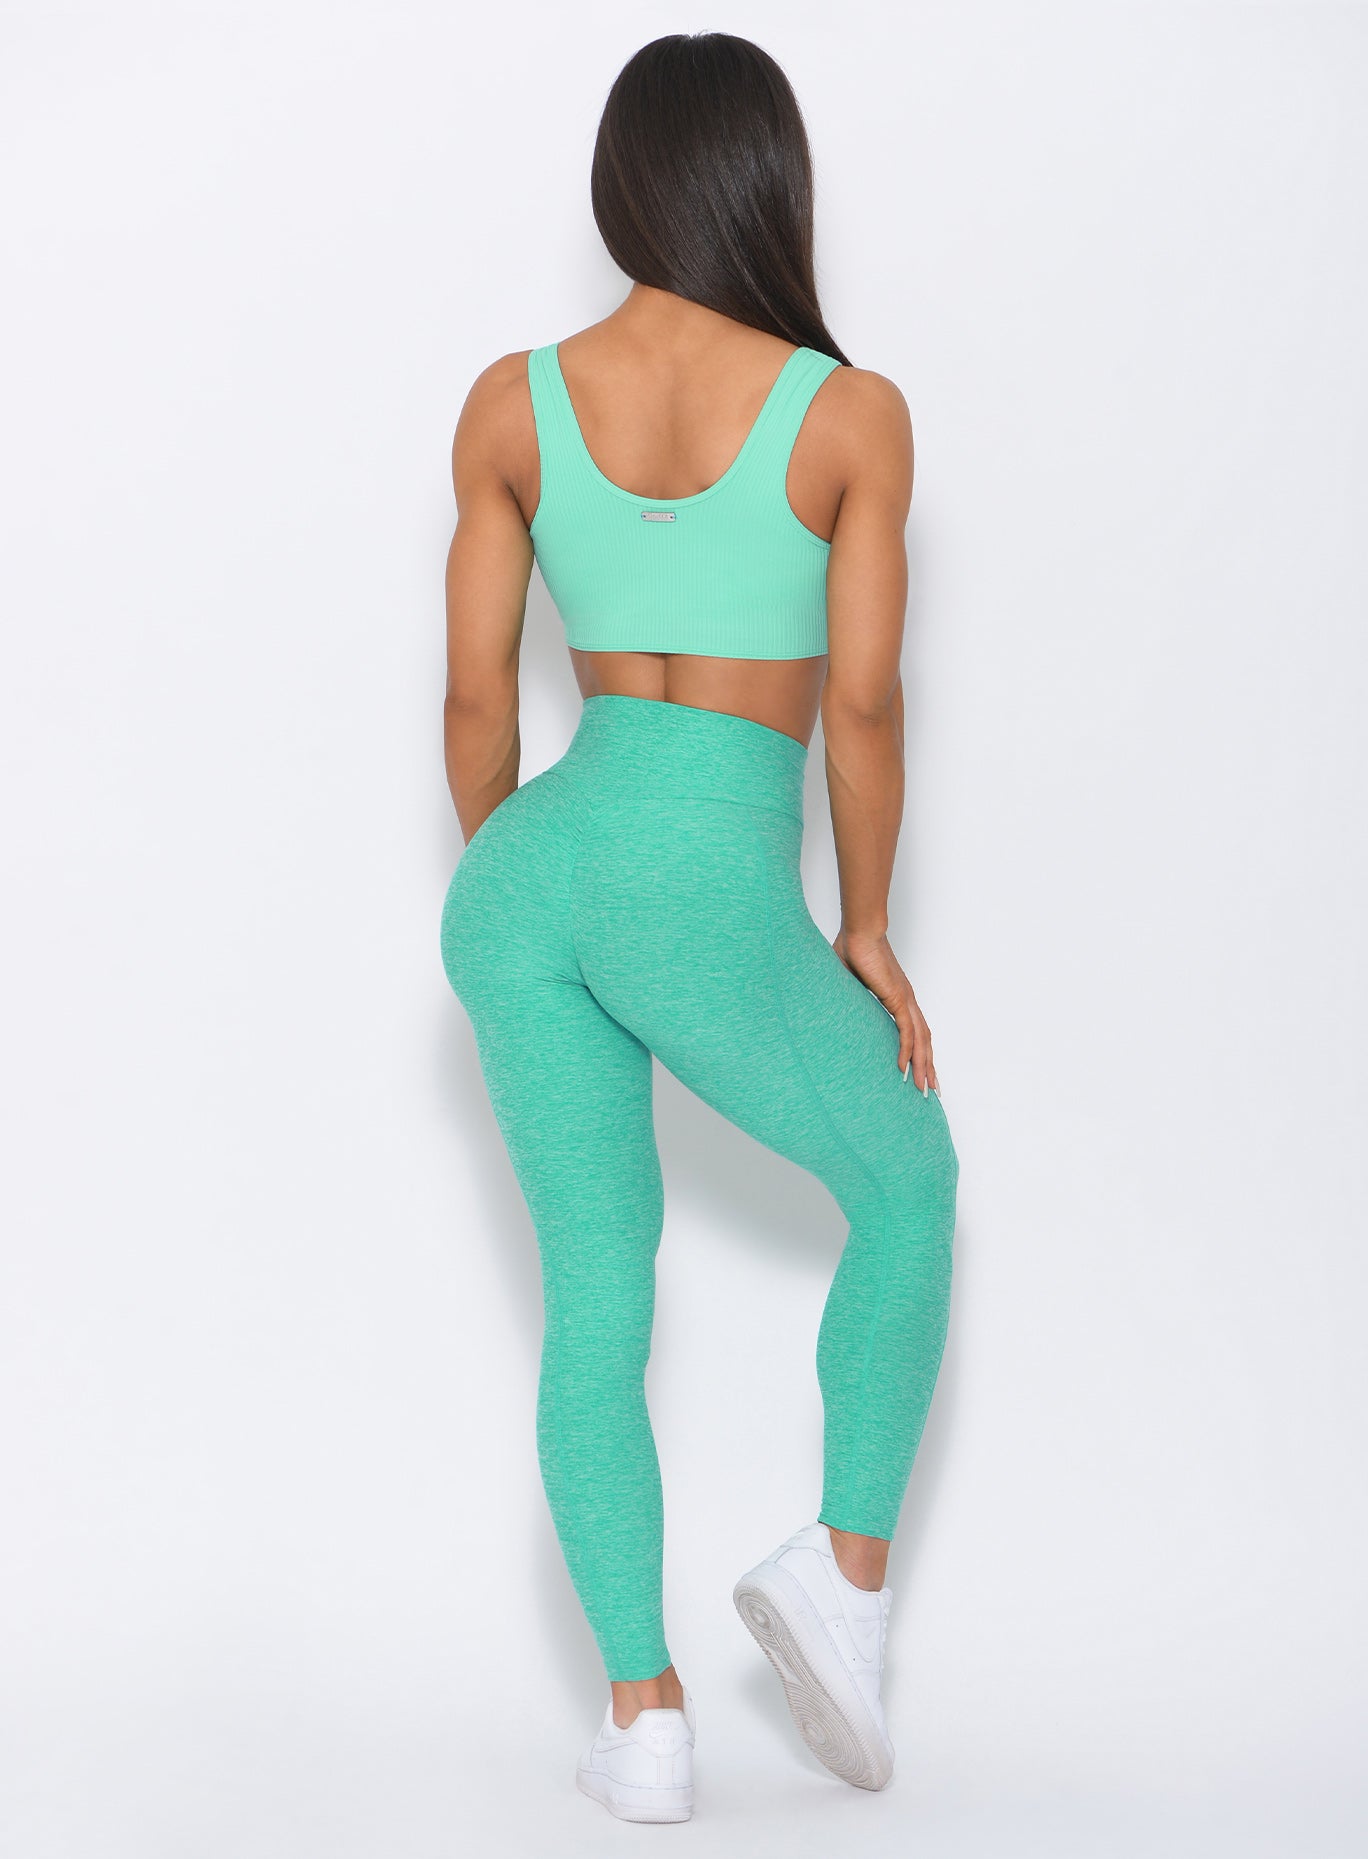 Back view of the model in our mint Brazilian contour leggings and a matching bra '